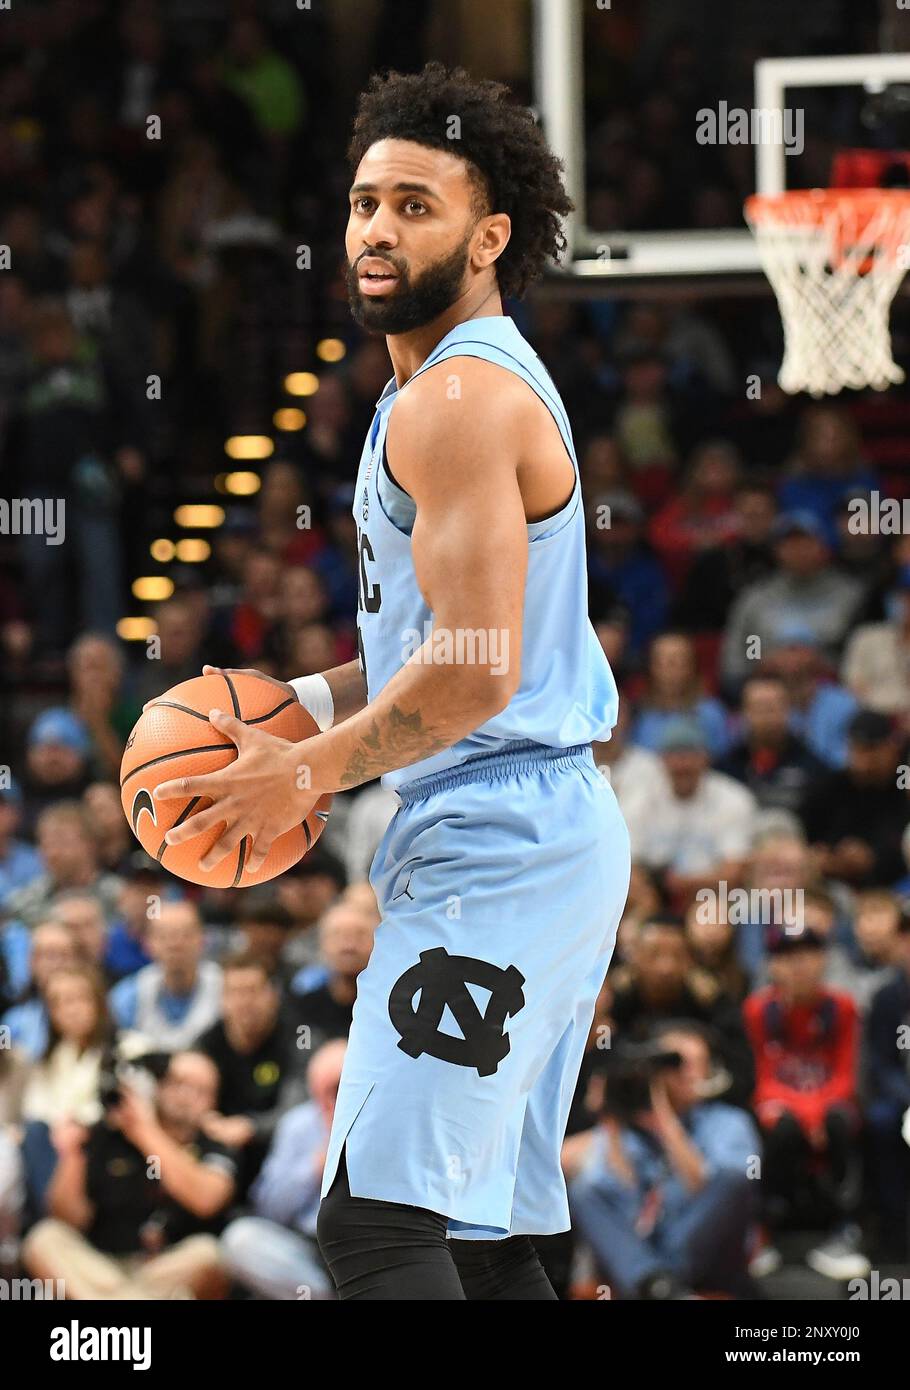 PORTLAND, OR - NOVEMBER 26: North Carolina guard Joel Berry II (2) looks to  pass in the championship game of the Victory Bracket at the PK80-Phil  Knight Invitational between the North Carolina